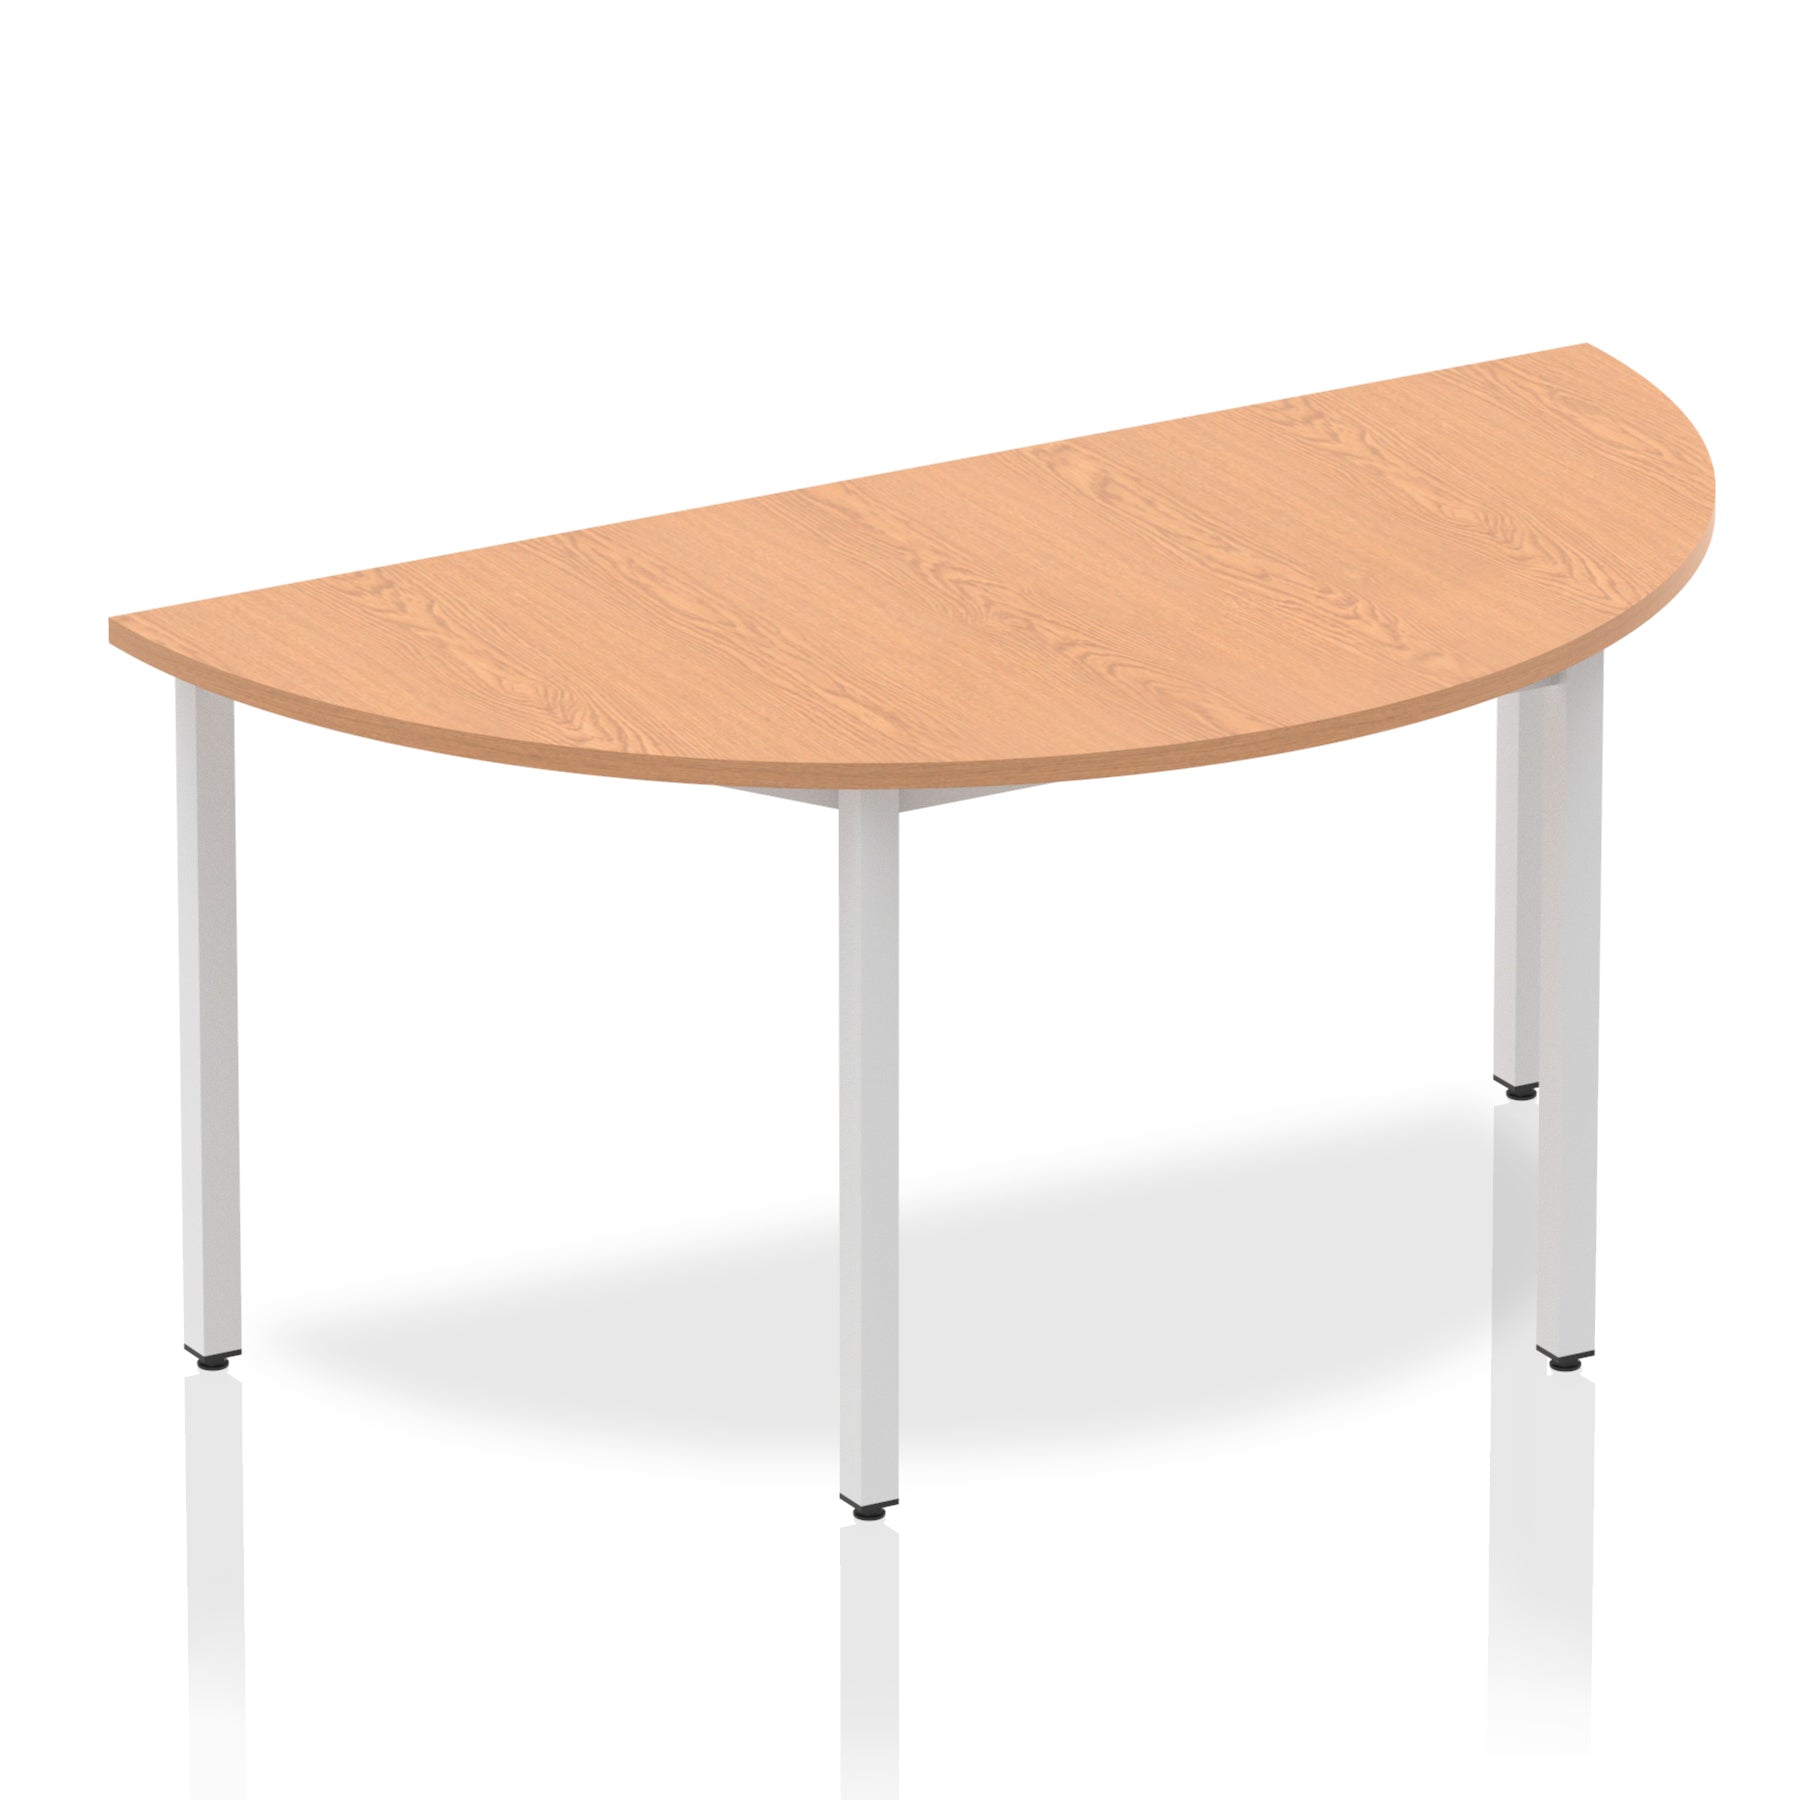 Impulse 1600mm Semi Circle Table Oak Top Silver Box Frame Leg BF00138 - NWT FM SOLUTIONS - YOUR CATERING WHOLESALER